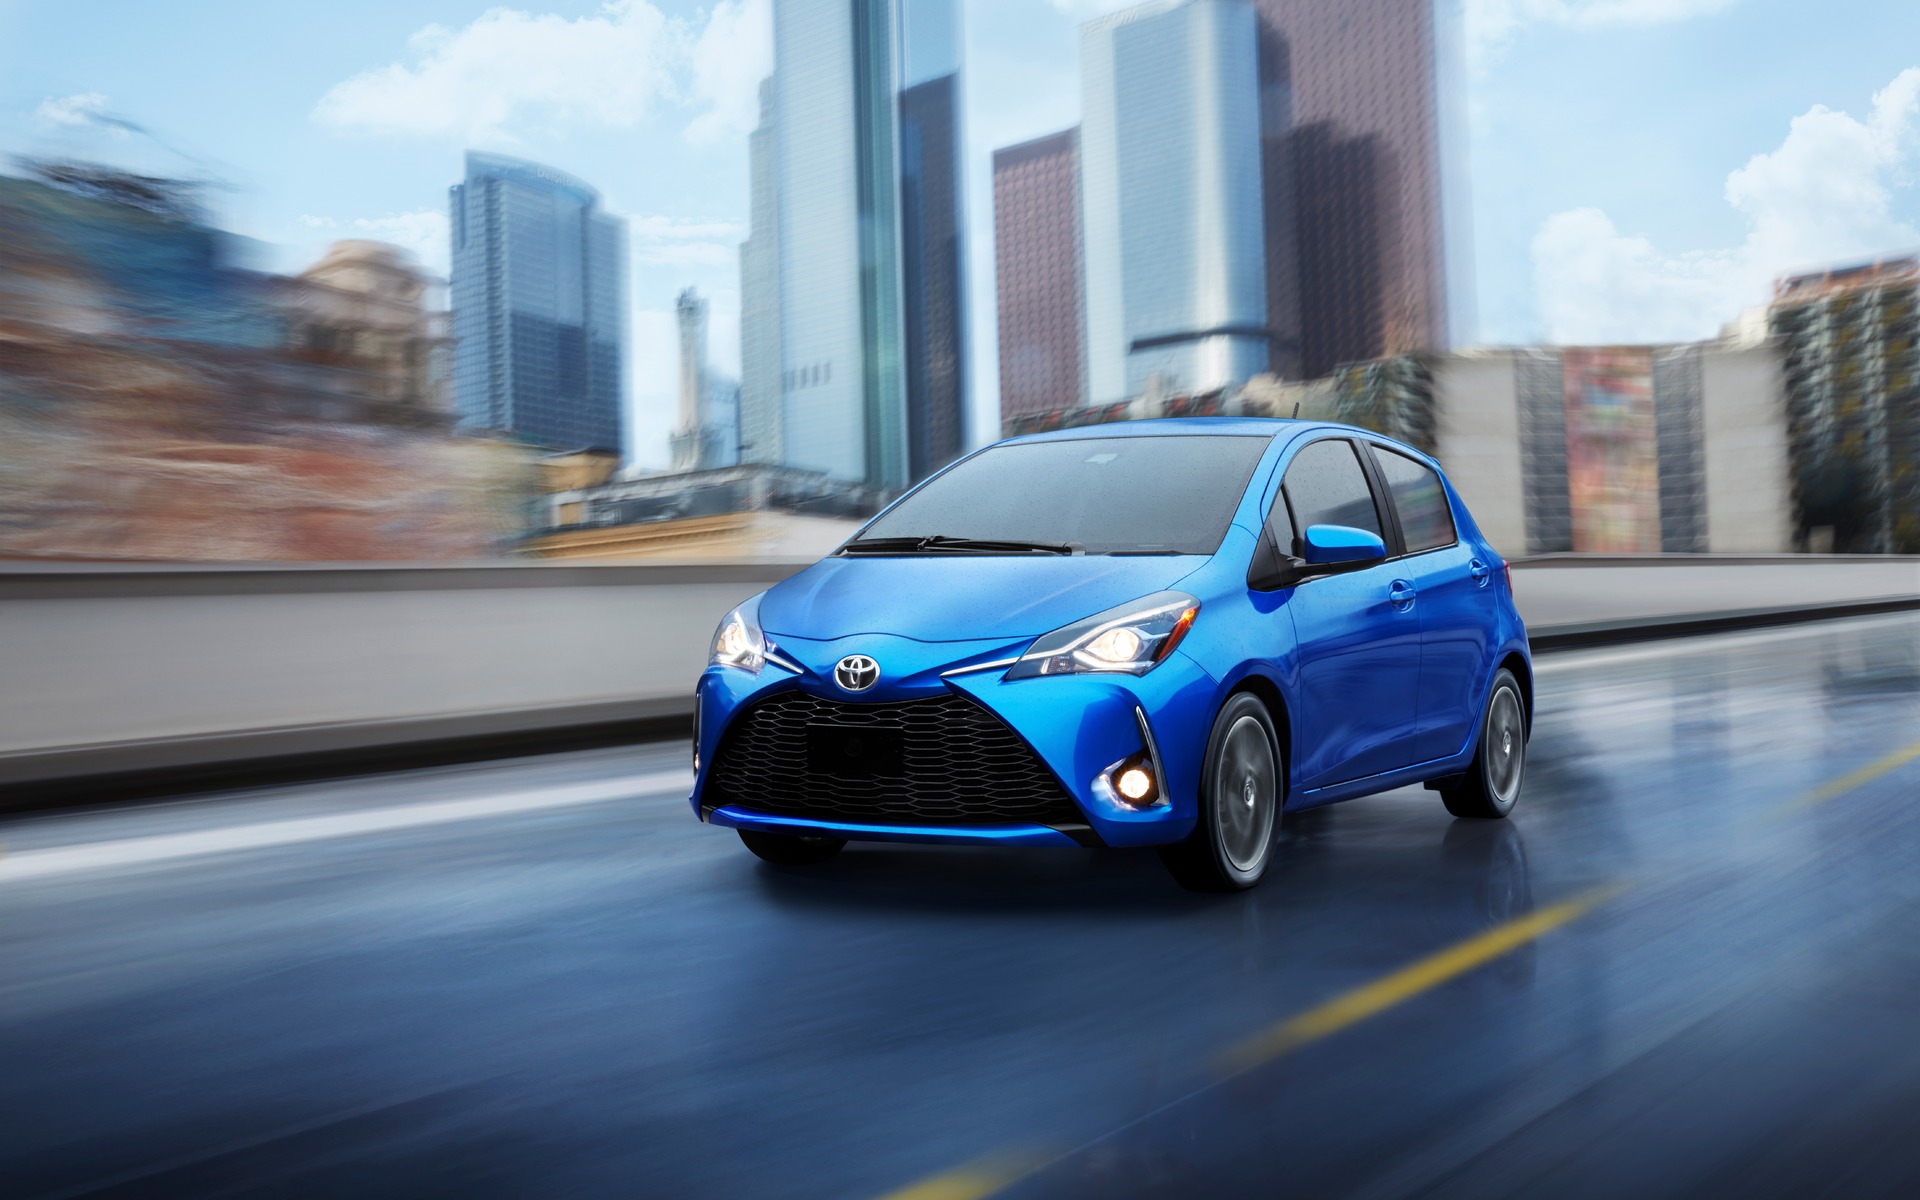 Toyota Yaris 2019 - Price in India, Mileage, Reviews, Colours,  Specification, Images - Overdrive